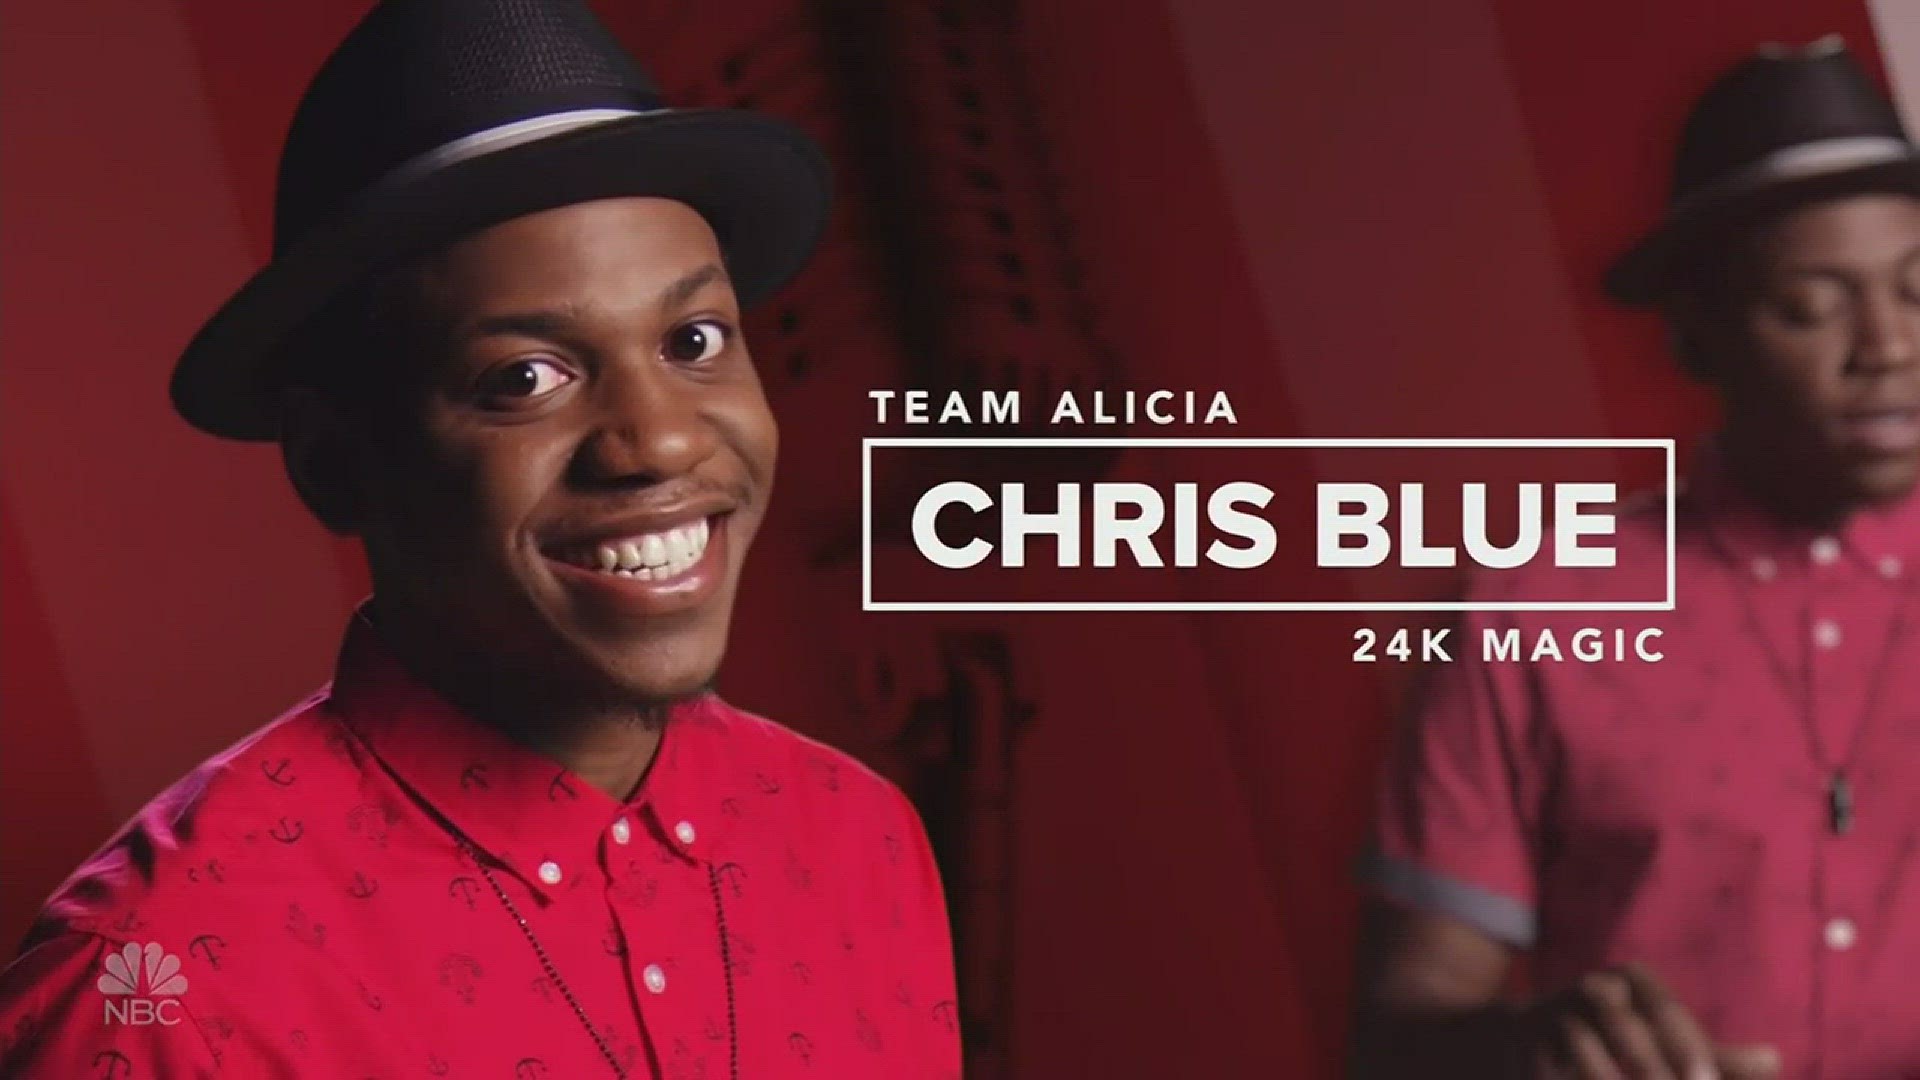 Knoxville singer Chris Blue lit up the stage for NBC's The Voice Top 10 with Bruno Mars' '24K Magic.'